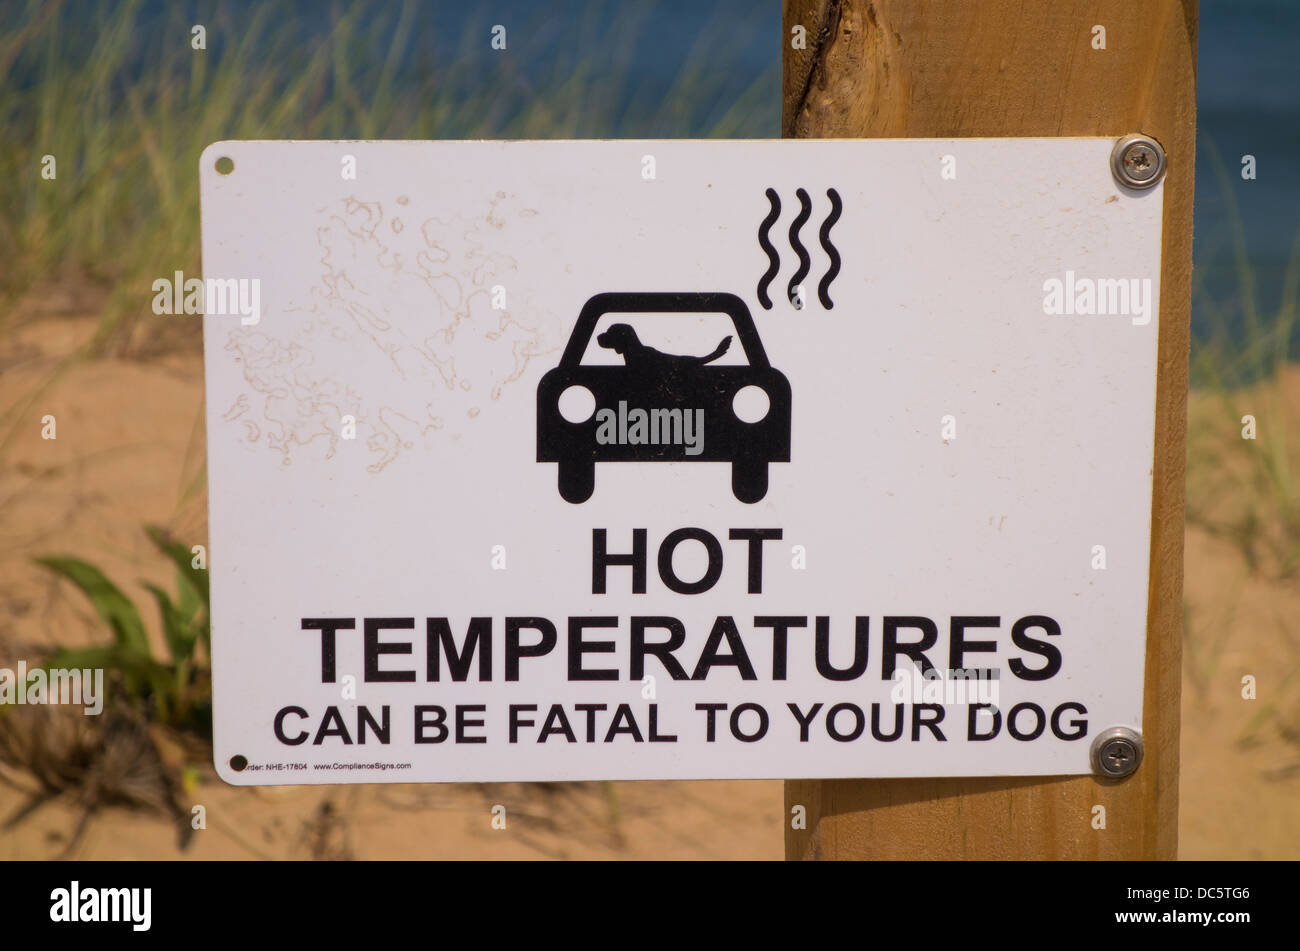 CAPE COD, MASSACHUSETTS, USA - Hot Temperatures warning sign, for dogs in cars, at White Crest beach near town of Wellfleet. Stock Photo